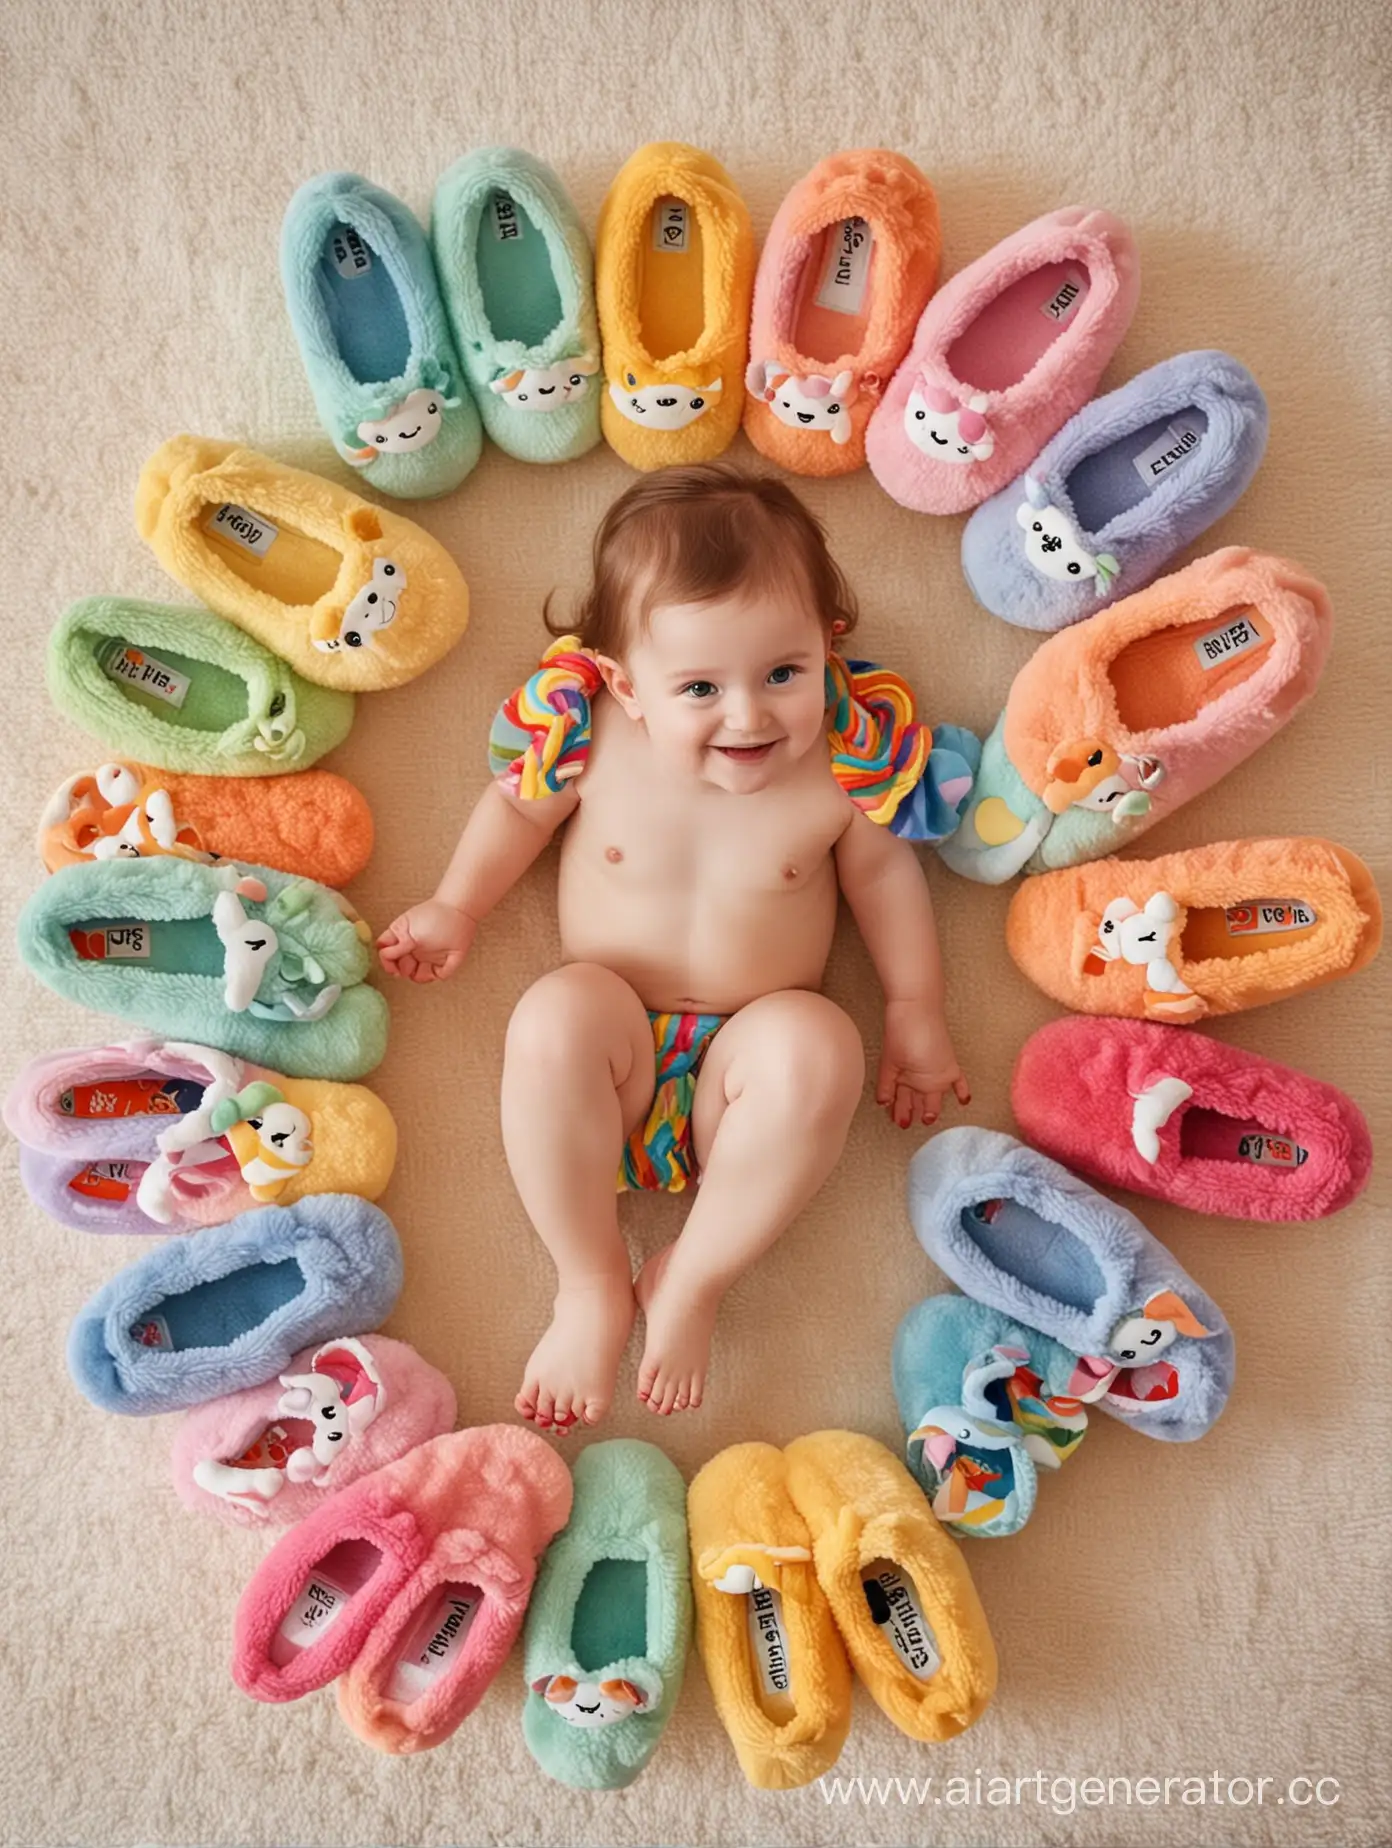 Joyful-Children-Playing-in-RainbowColored-Slippers-under-a-Captivating-Sky